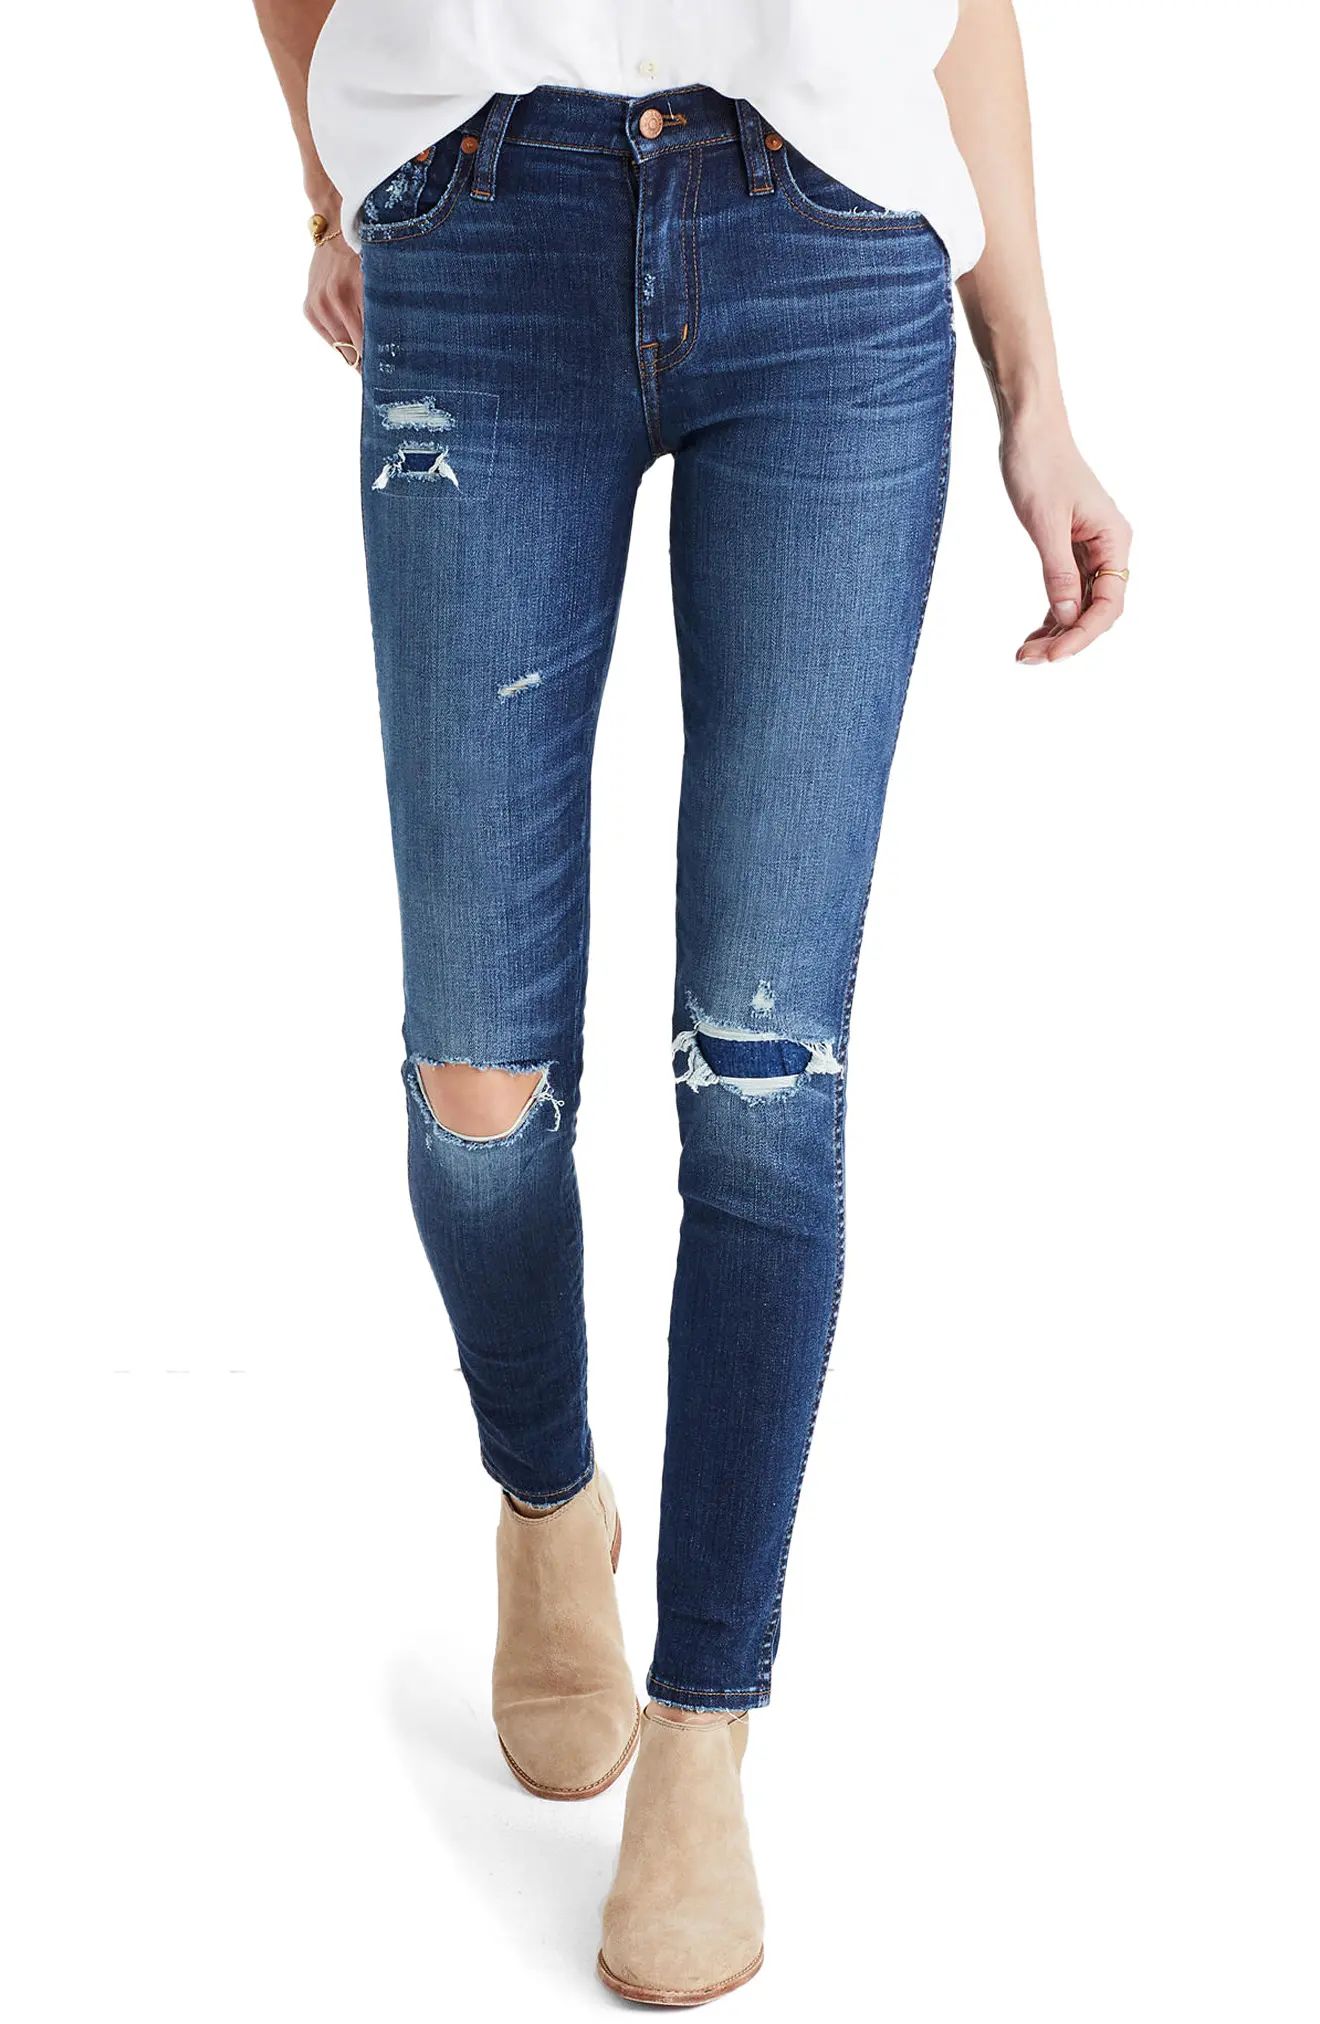 High Waist Skinny Jeans: Ripped & Patched Edition | Nordstrom